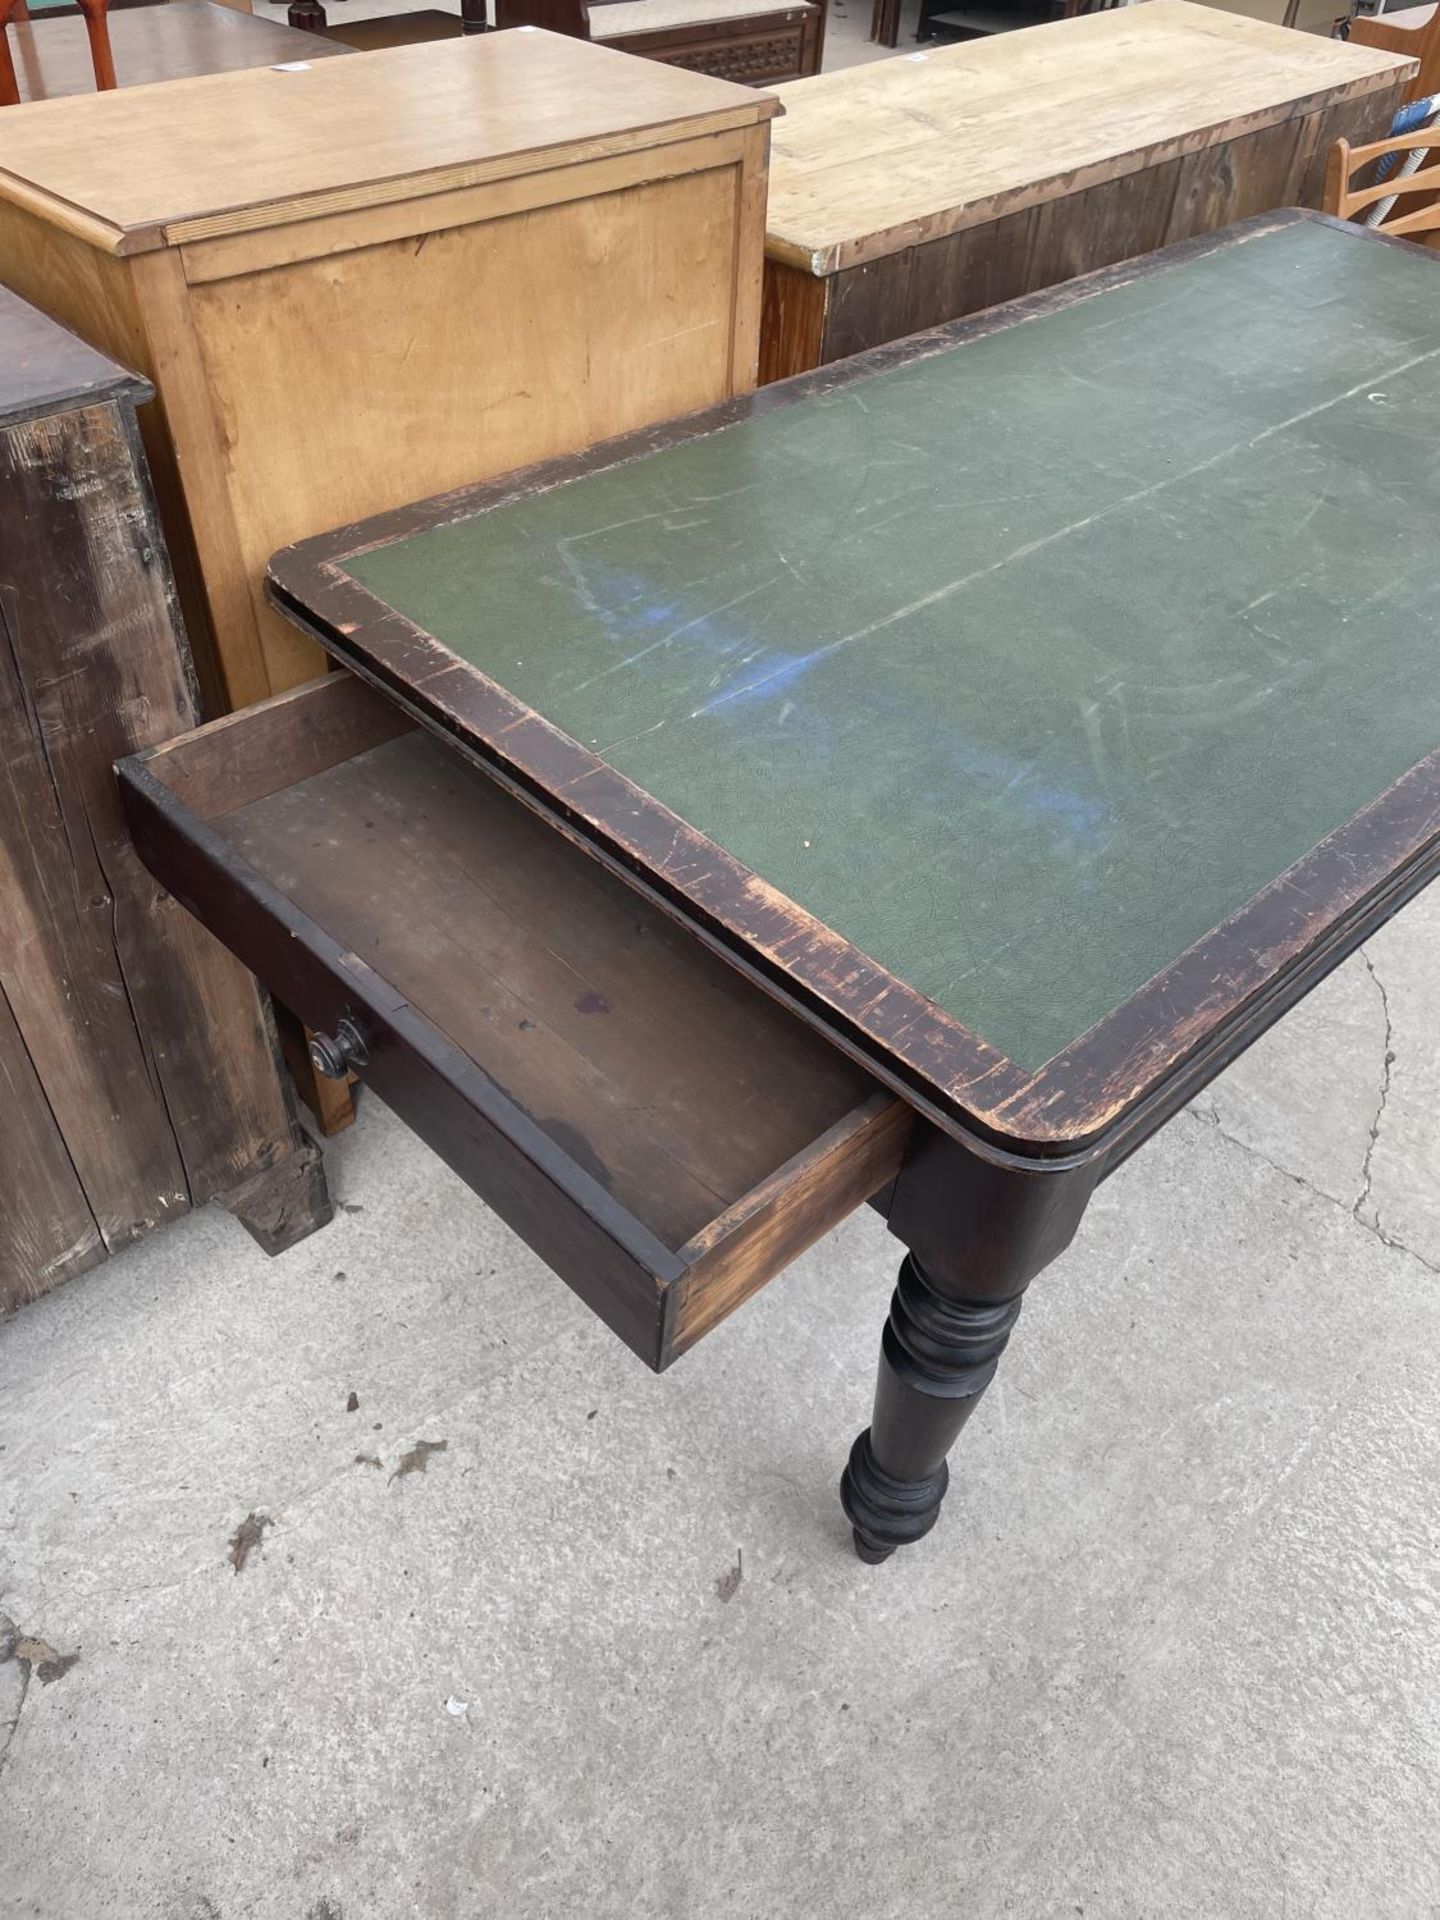 A VICTORIAN PINE OFFICE TABLE WITH TWO DRAWERS, ON TURNED LEGS, 71X36" WITH INSET LEATHERETTE TOP - Image 3 of 5